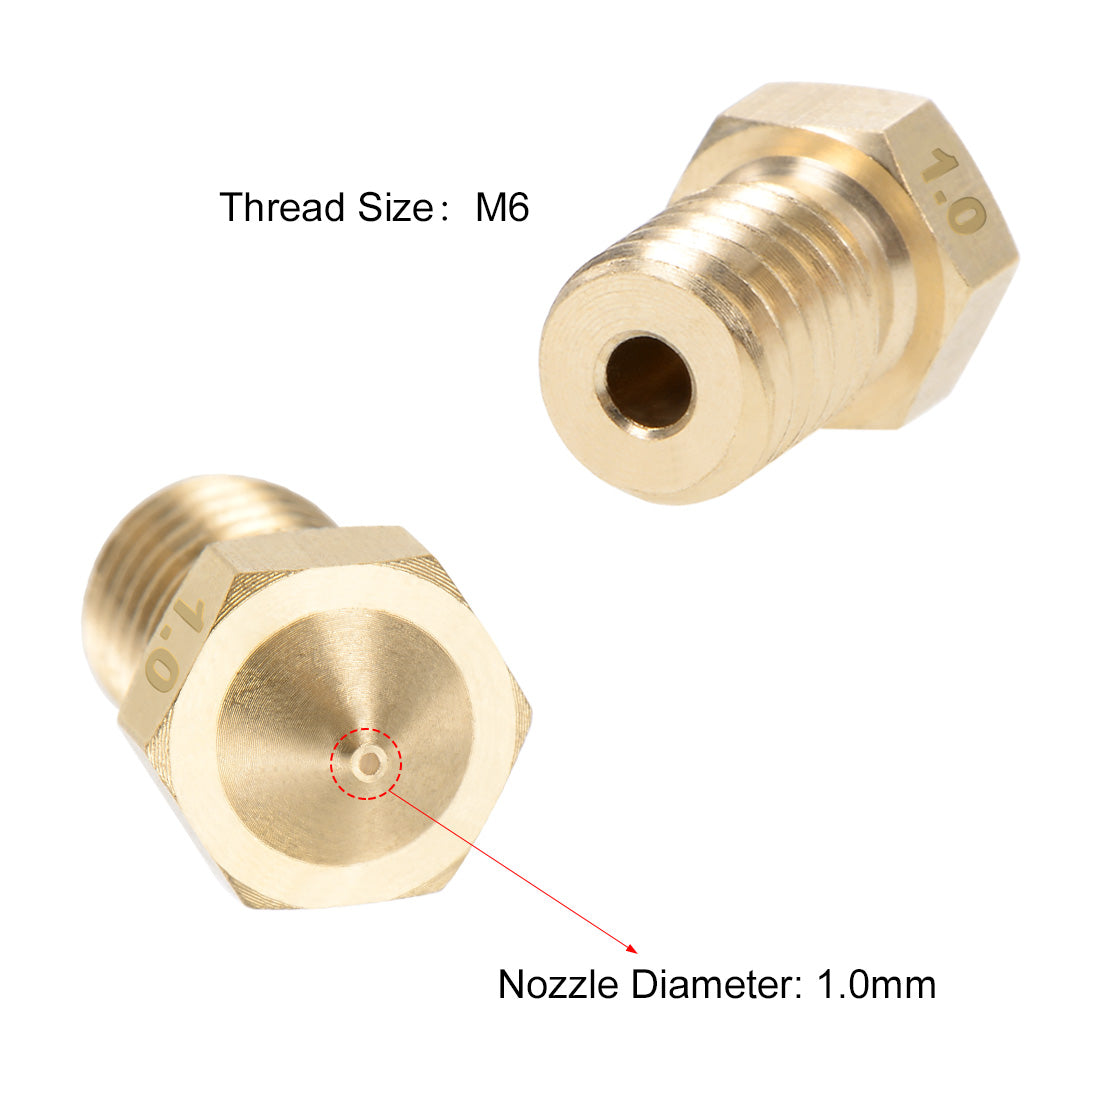 uxcell Uxcell 1mm 3D Printer Nozzle Head for Extruder Print, Brass 10pcs